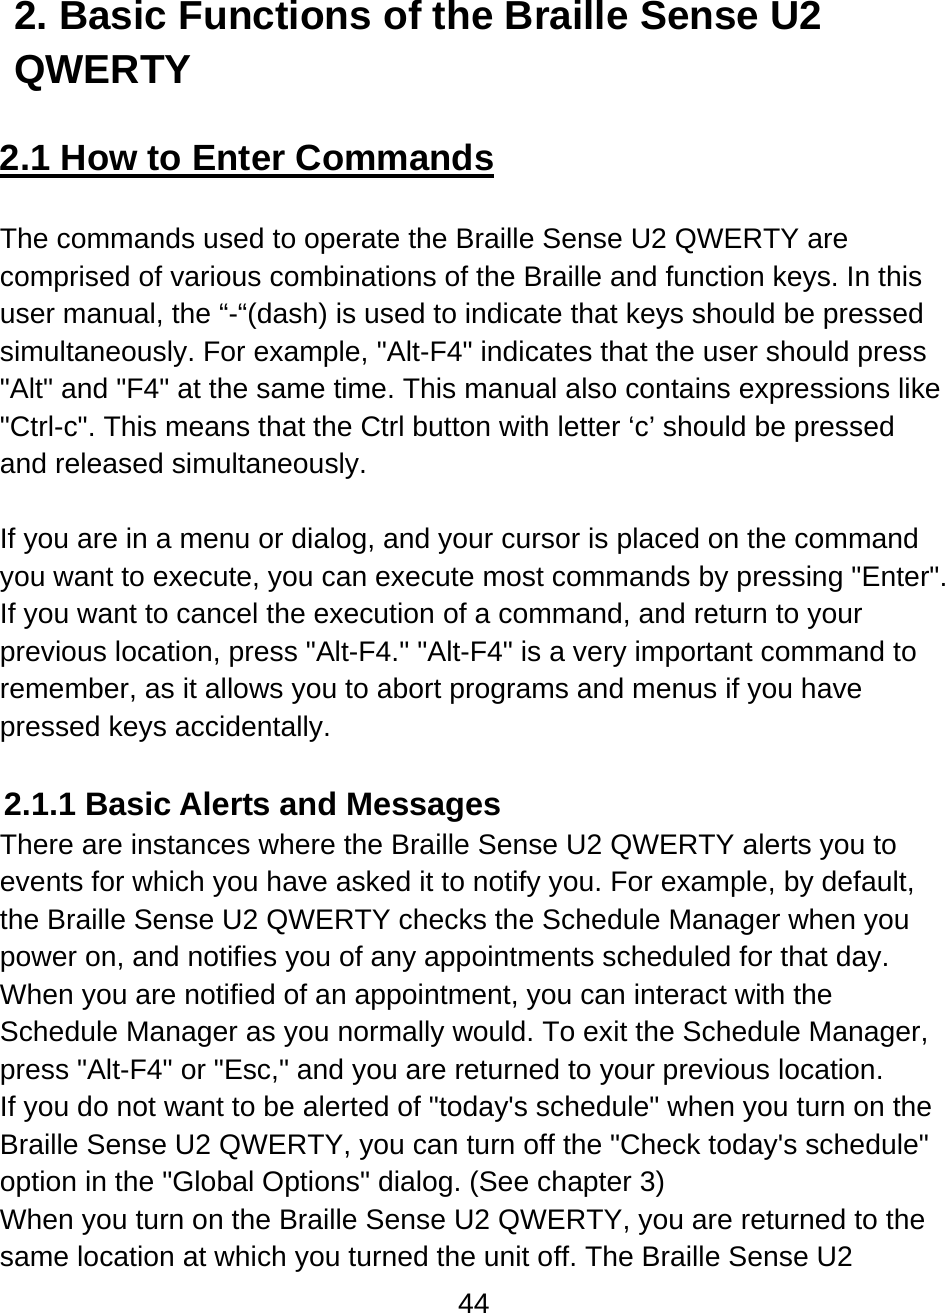 44  2. Basic Functions of the Braille Sense U2 QWERTY  2.1 How to Enter Commands  The commands used to operate the Braille Sense U2 QWERTY are comprised of various combinations of the Braille and function keys. In this user manual, the “-“(dash) is used to indicate that keys should be pressed simultaneously. For example, &quot;Alt-F4&quot; indicates that the user should press &quot;Alt&quot; and &quot;F4&quot; at the same time. This manual also contains expressions like &quot;Ctrl-c&quot;. This means that the Ctrl button with letter ‘c’ should be pressed and released simultaneously.   If you are in a menu or dialog, and your cursor is placed on the command you want to execute, you can execute most commands by pressing &quot;Enter&quot;. If you want to cancel the execution of a command, and return to your previous location, press &quot;Alt-F4.&quot; &quot;Alt-F4&quot; is a very important command to remember, as it allows you to abort programs and menus if you have pressed keys accidentally.  2.1.1 Basic Alerts and Messages There are instances where the Braille Sense U2 QWERTY alerts you to events for which you have asked it to notify you. For example, by default, the Braille Sense U2 QWERTY checks the Schedule Manager when you power on, and notifies you of any appointments scheduled for that day.  When you are notified of an appointment, you can interact with the Schedule Manager as you normally would. To exit the Schedule Manager, press &quot;Alt-F4&quot; or &quot;Esc,&quot; and you are returned to your previous location.   If you do not want to be alerted of &quot;today&apos;s schedule&quot; when you turn on the Braille Sense U2 QWERTY, you can turn off the &quot;Check today&apos;s schedule&quot; option in the &quot;Global Options&quot; dialog. (See chapter 3) When you turn on the Braille Sense U2 QWERTY, you are returned to the same location at which you turned the unit off. The Braille Sense U2 